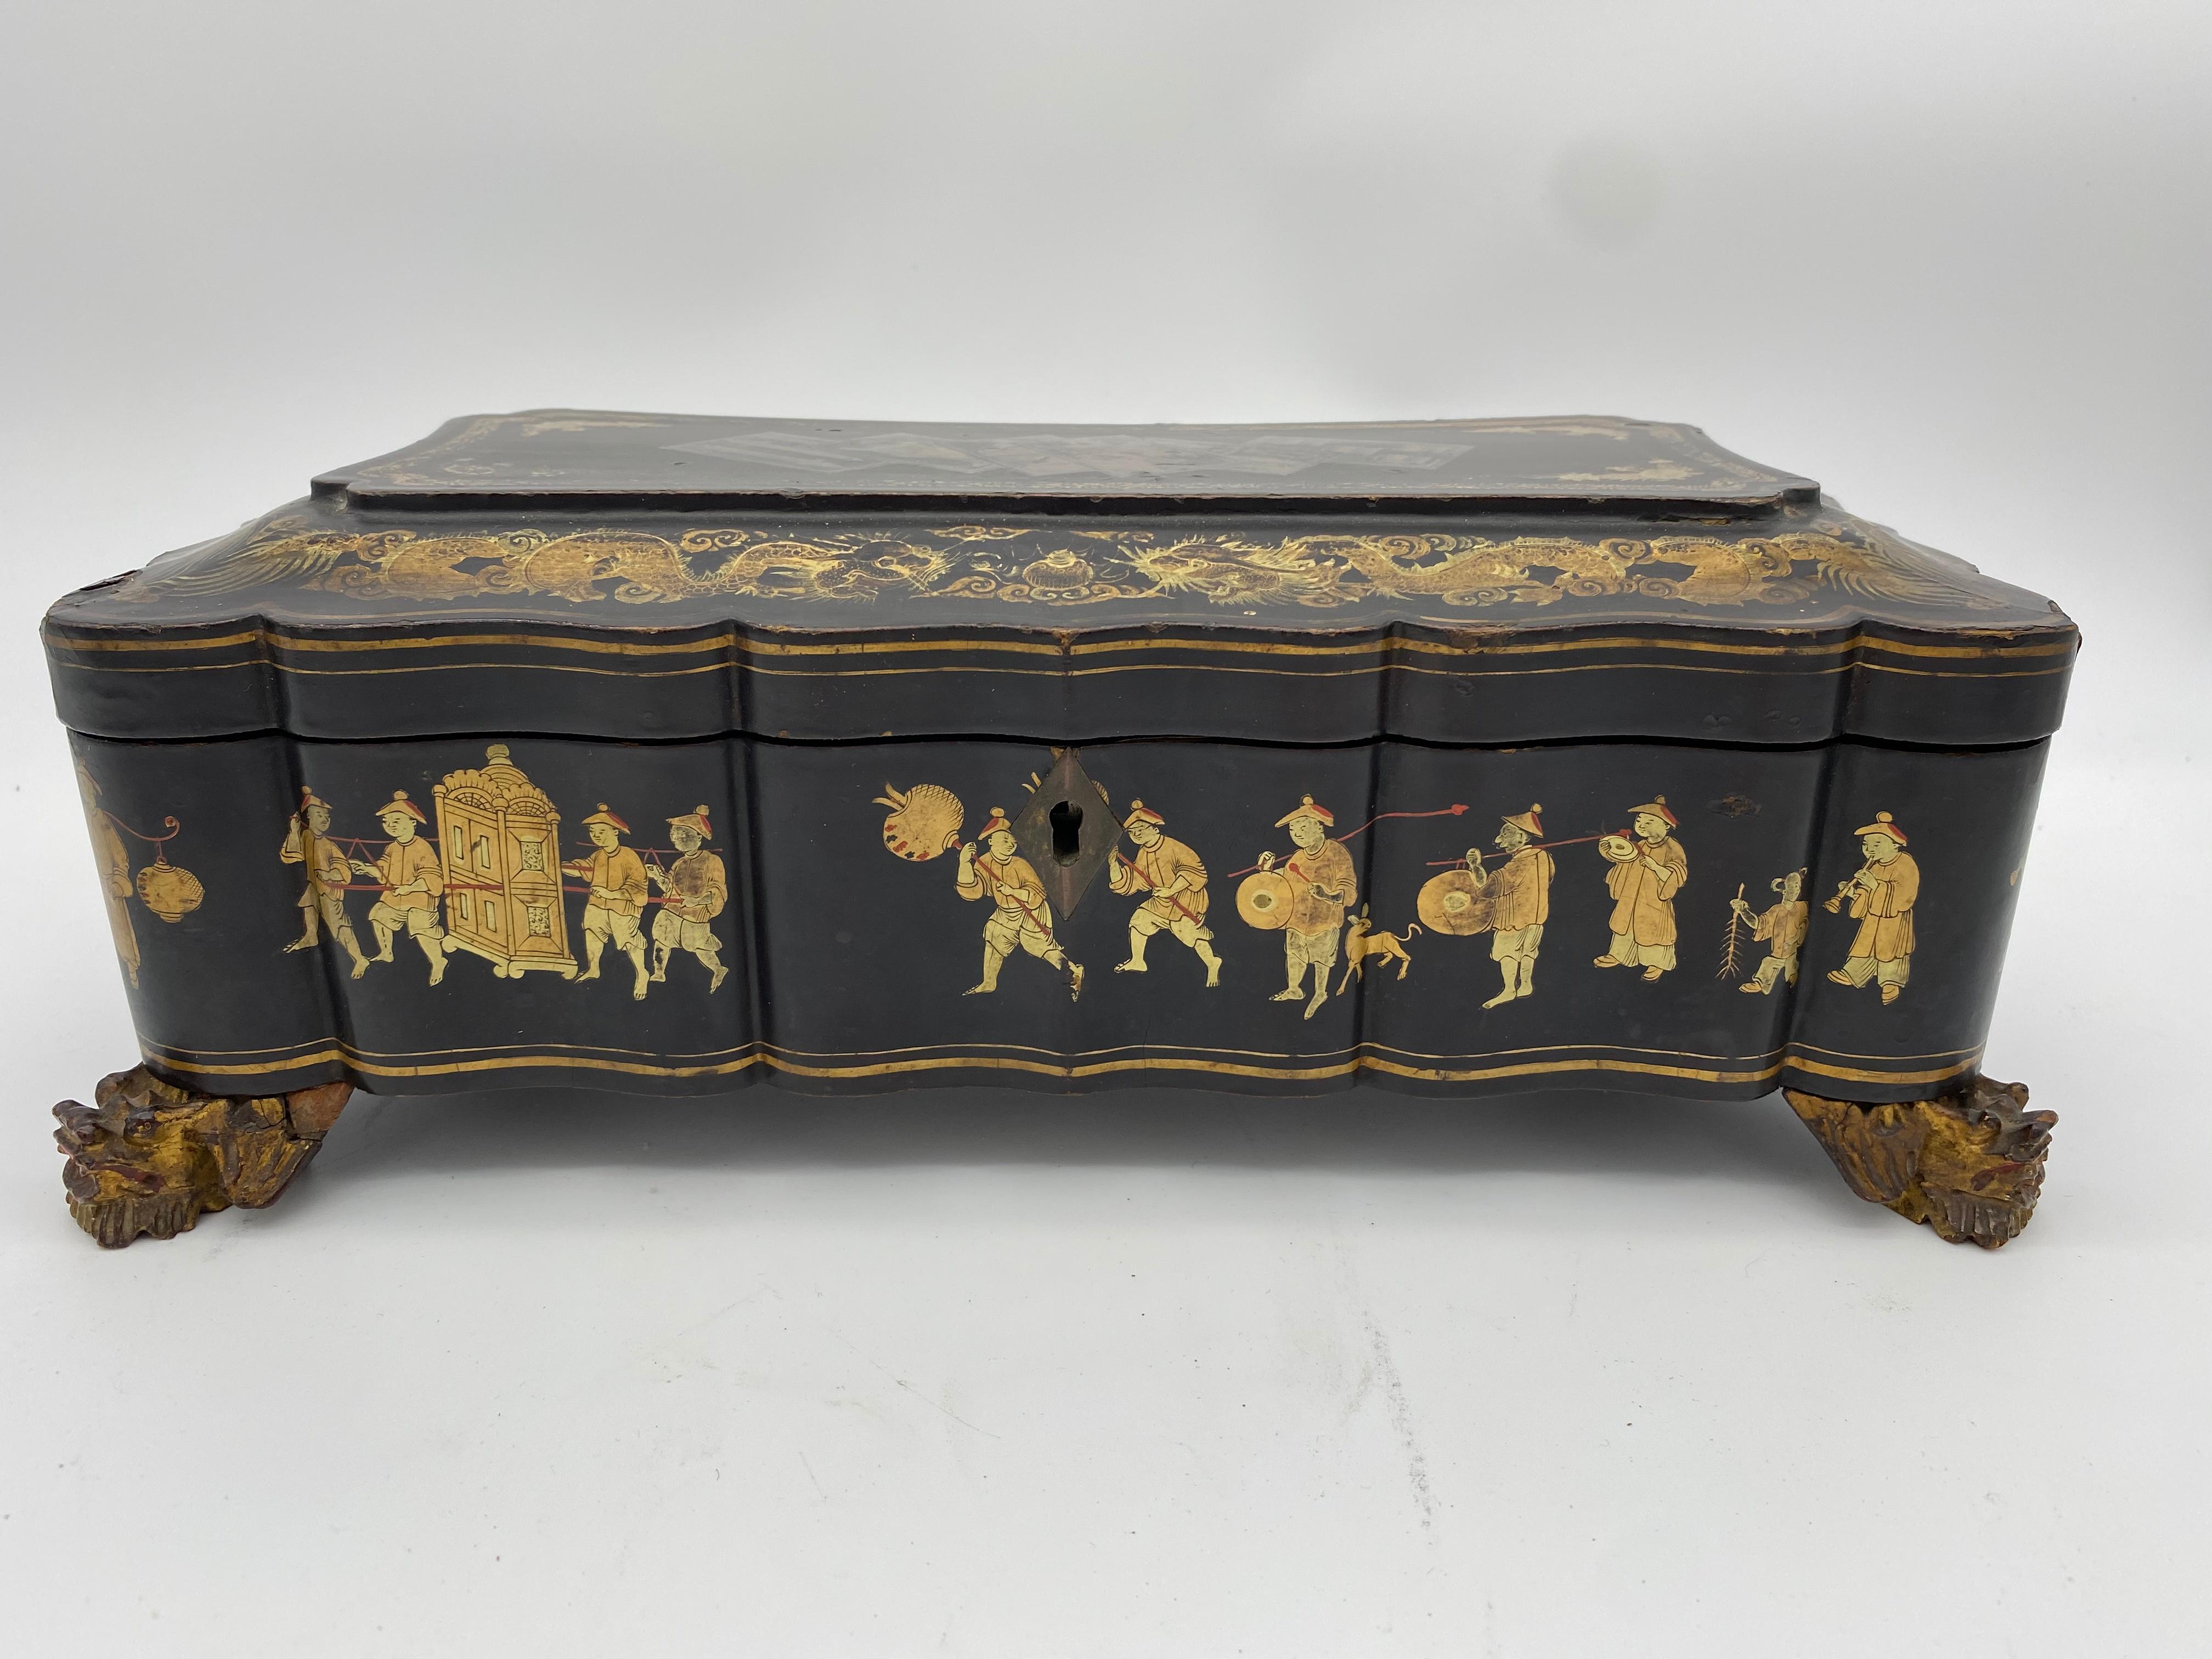 19th century Chinese lacquer box from the Qing Dynasty. Used for board games and golden by hand. In very good condition.